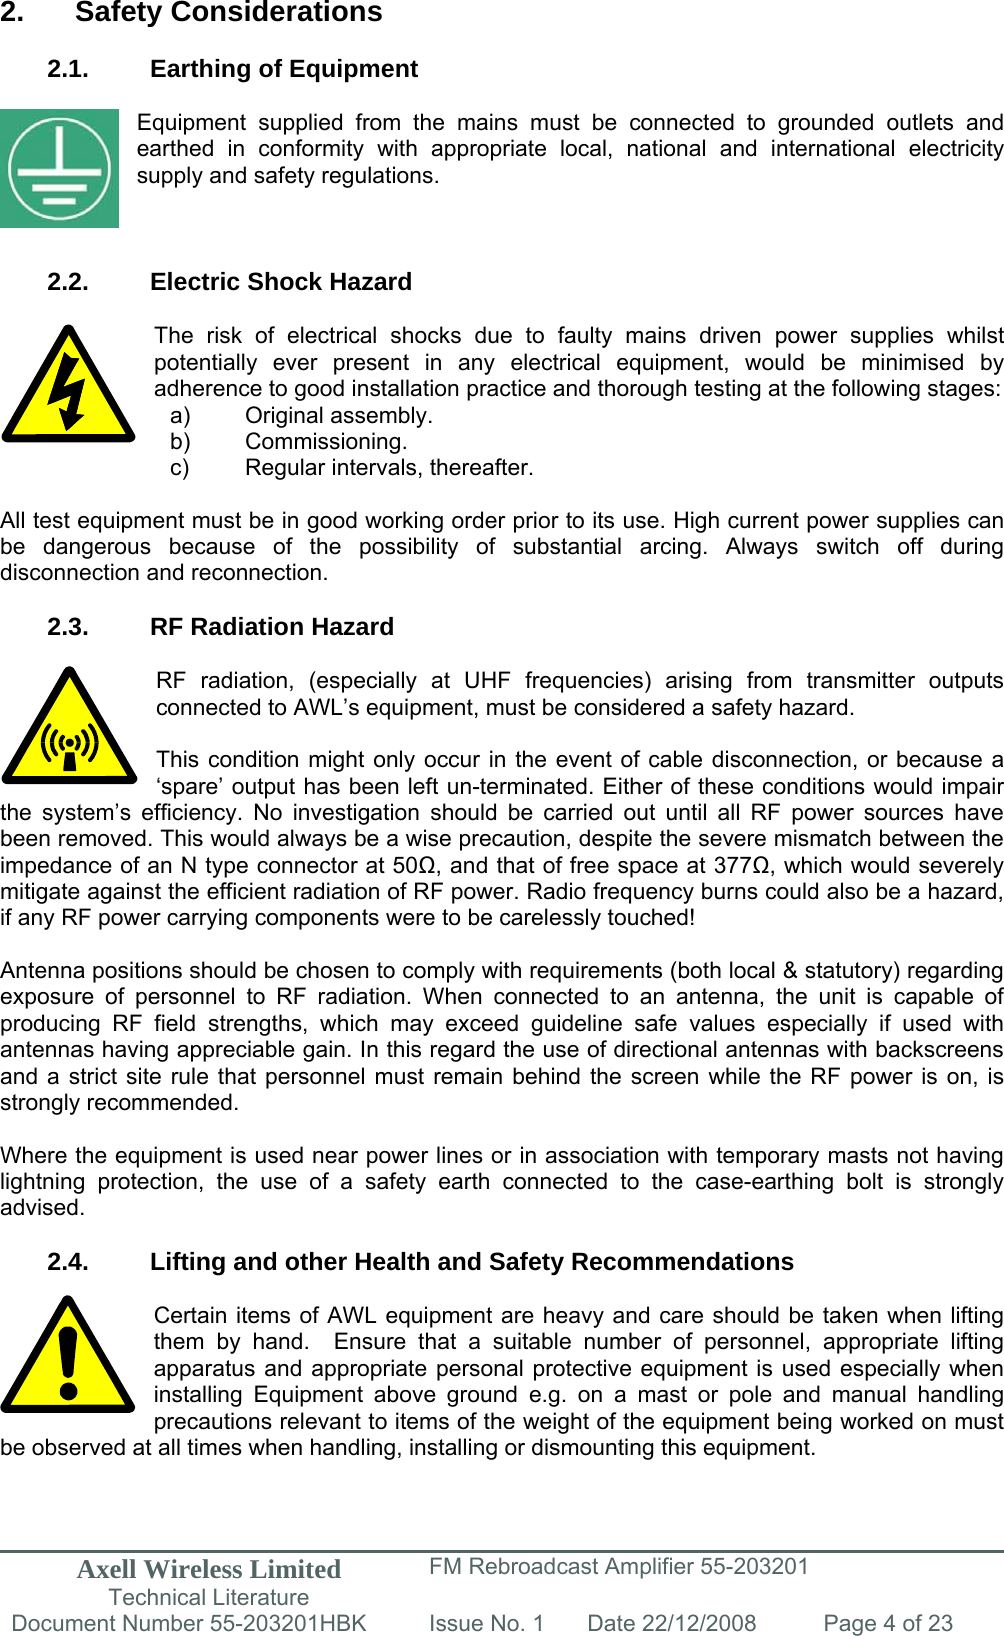 Axell Wireless Limited Technical Literature FM Rebroadcast Amplifier 55-203201 Document Number 55-203201HBK Issue No. 1  Date 22/12/2008  Page 4 of 23   2. Safety Considerations  2.1.  Earthing of Equipment  Equipment supplied from the mains must be connected to grounded outlets and earthed in conformity with appropriate local, national and international electricity supply and safety regulations.    2.2.  Electric Shock Hazard  The risk of electrical shocks due to faulty mains driven power supplies whilst potentially ever present in any electrical equipment, would be minimised by adherence to good installation practice and thorough testing at the following stages:     All test equipment must be in good working order prior to its use. High current power supplies can be dangerous because of the possibility of substantial arcing. Always switch off during disconnection and reconnection.  2.3.  RF Radiation Hazard  RF radiation, (especially at UHF frequencies) arising from transmitter outputs connected to AWL’s equipment, must be considered a safety hazard.  This condition might only occur in the event of cable disconnection, or because a ‘spare’ output has been left un-terminated. Either of these conditions would impair the system’s efficiency. No investigation should be carried out until all RF power sources have been removed. This would always be a wise precaution, despite the severe mismatch between the impedance of an N type connector at 50, and that of free space at 377, which would severely mitigate against the efficient radiation of RF power. Radio frequency burns could also be a hazard, if any RF power carrying components were to be carelessly touched!  Antenna positions should be chosen to comply with requirements (both local &amp; statutory) regarding exposure of personnel to RF radiation. When connected to an antenna, the unit is capable of producing RF field strengths, which may exceed guideline safe values especially if used with antennas having appreciable gain. In this regard the use of directional antennas with backscreens and a strict site rule that personnel must remain behind the screen while the RF power is on, is strongly recommended.  Where the equipment is used near power lines or in association with temporary masts not having lightning protection, the use of a safety earth connected to the case-earthing bolt is strongly advised.  2.4.  Lifting and other Health and Safety Recommendations  Certain items of AWL equipment are heavy and care should be taken when lifting them by hand.  Ensure that a suitable number of personnel, appropriate lifting apparatus and appropriate personal protective equipment is used especially when installing Equipment above ground e.g. on a mast or pole and manual handling precautions relevant to items of the weight of the equipment being worked on must be observed at all times when handling, installing or dismounting this equipment.   a) Original assembly. b) Commissioning. c)  Regular intervals, thereafter. 